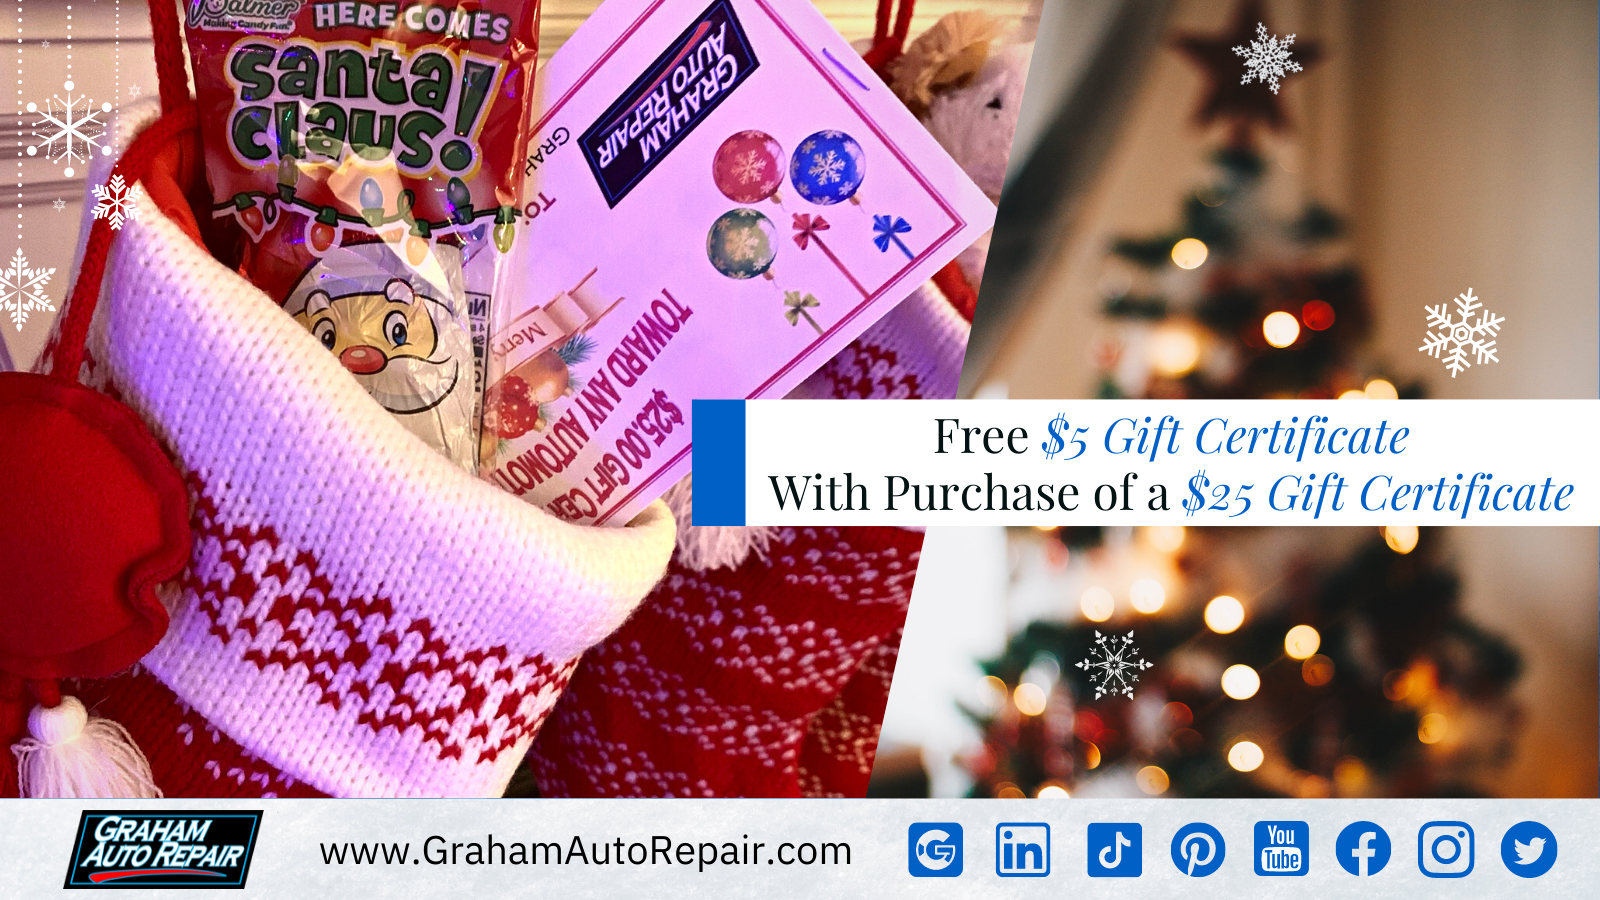 Free $5 Gift Certificate with Purchase of a $25 Gift Certificate at Graham Auto Repair